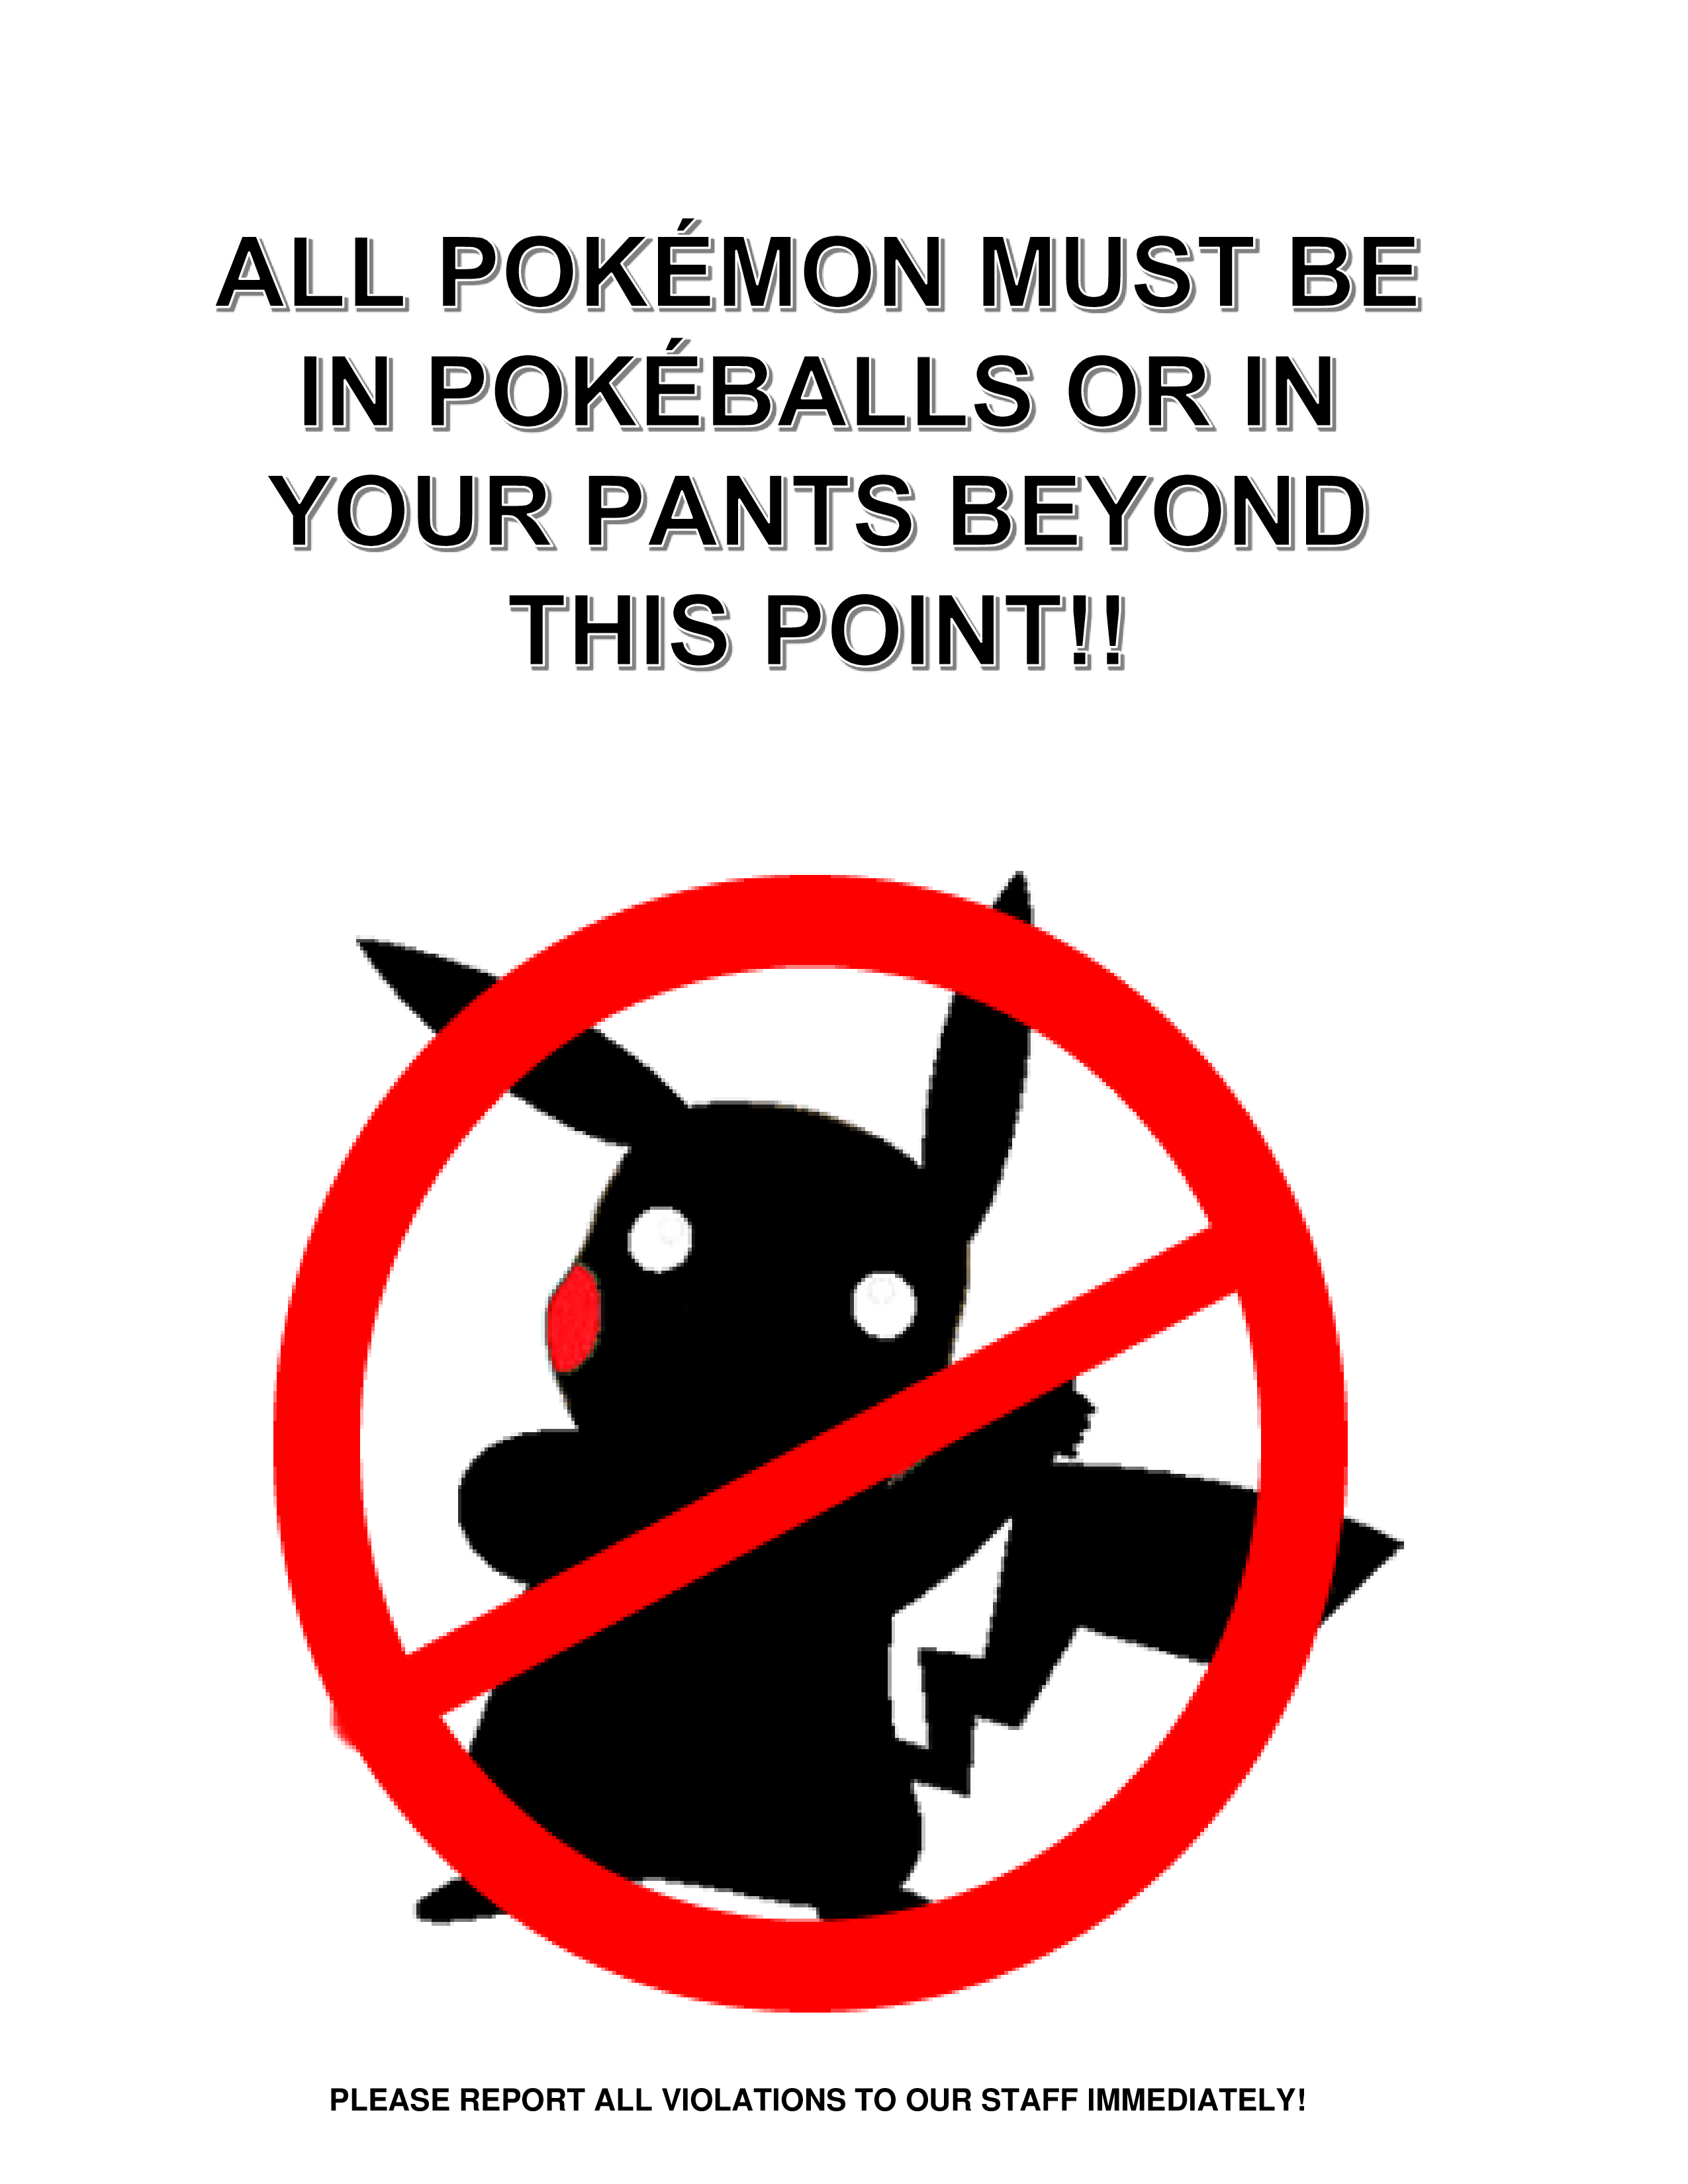 Pokemon Not Allowed Poster Template 模板